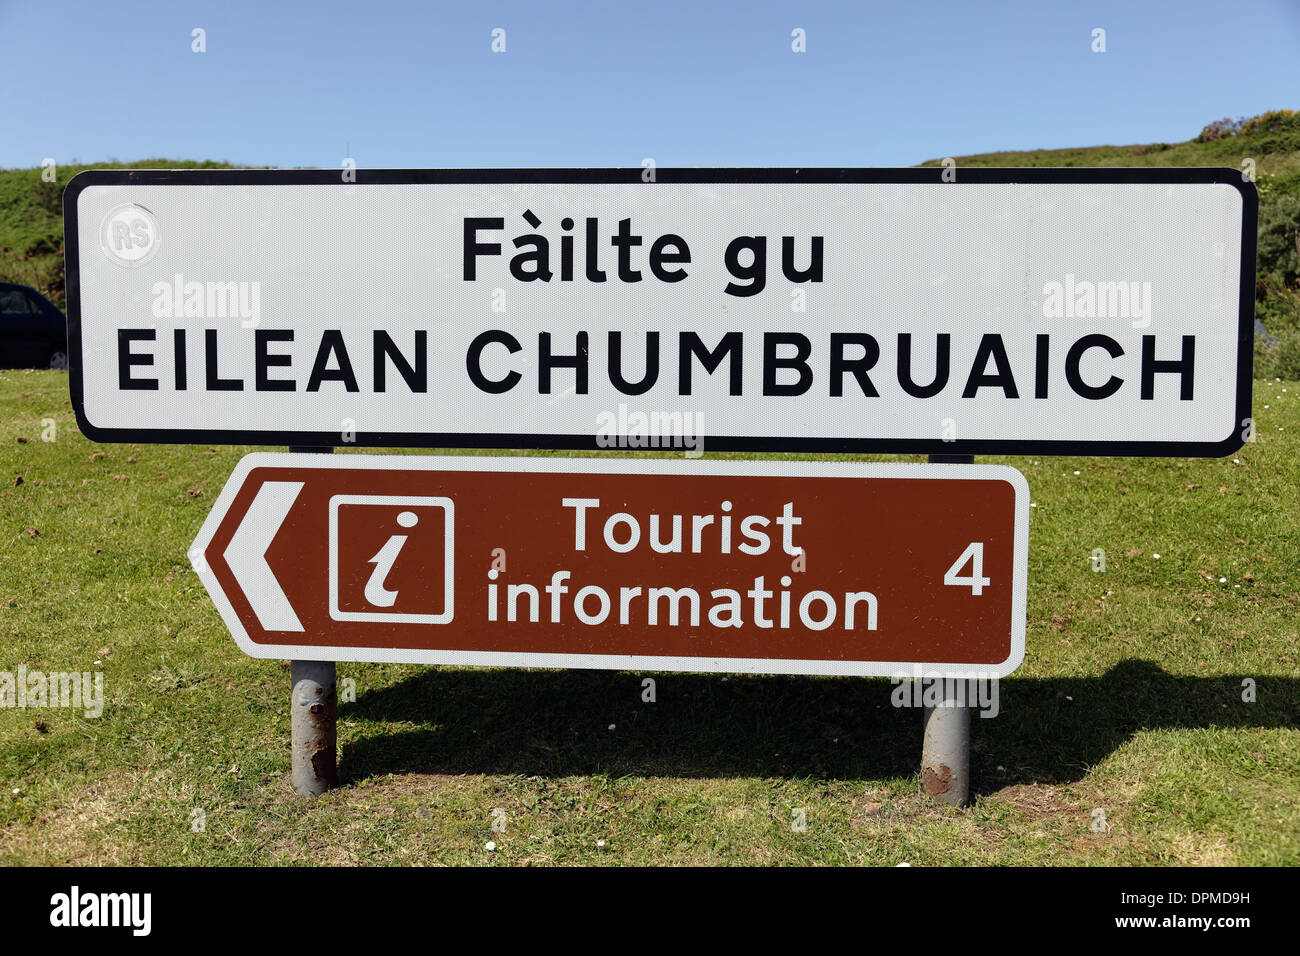 Gaelic Language sign Failte gu Eilean Chumbruaich, Welcome to Isle of Cumbrae, and Tourist Information in English sign, Great Cumbrae, Scotland, UK Stock Photo